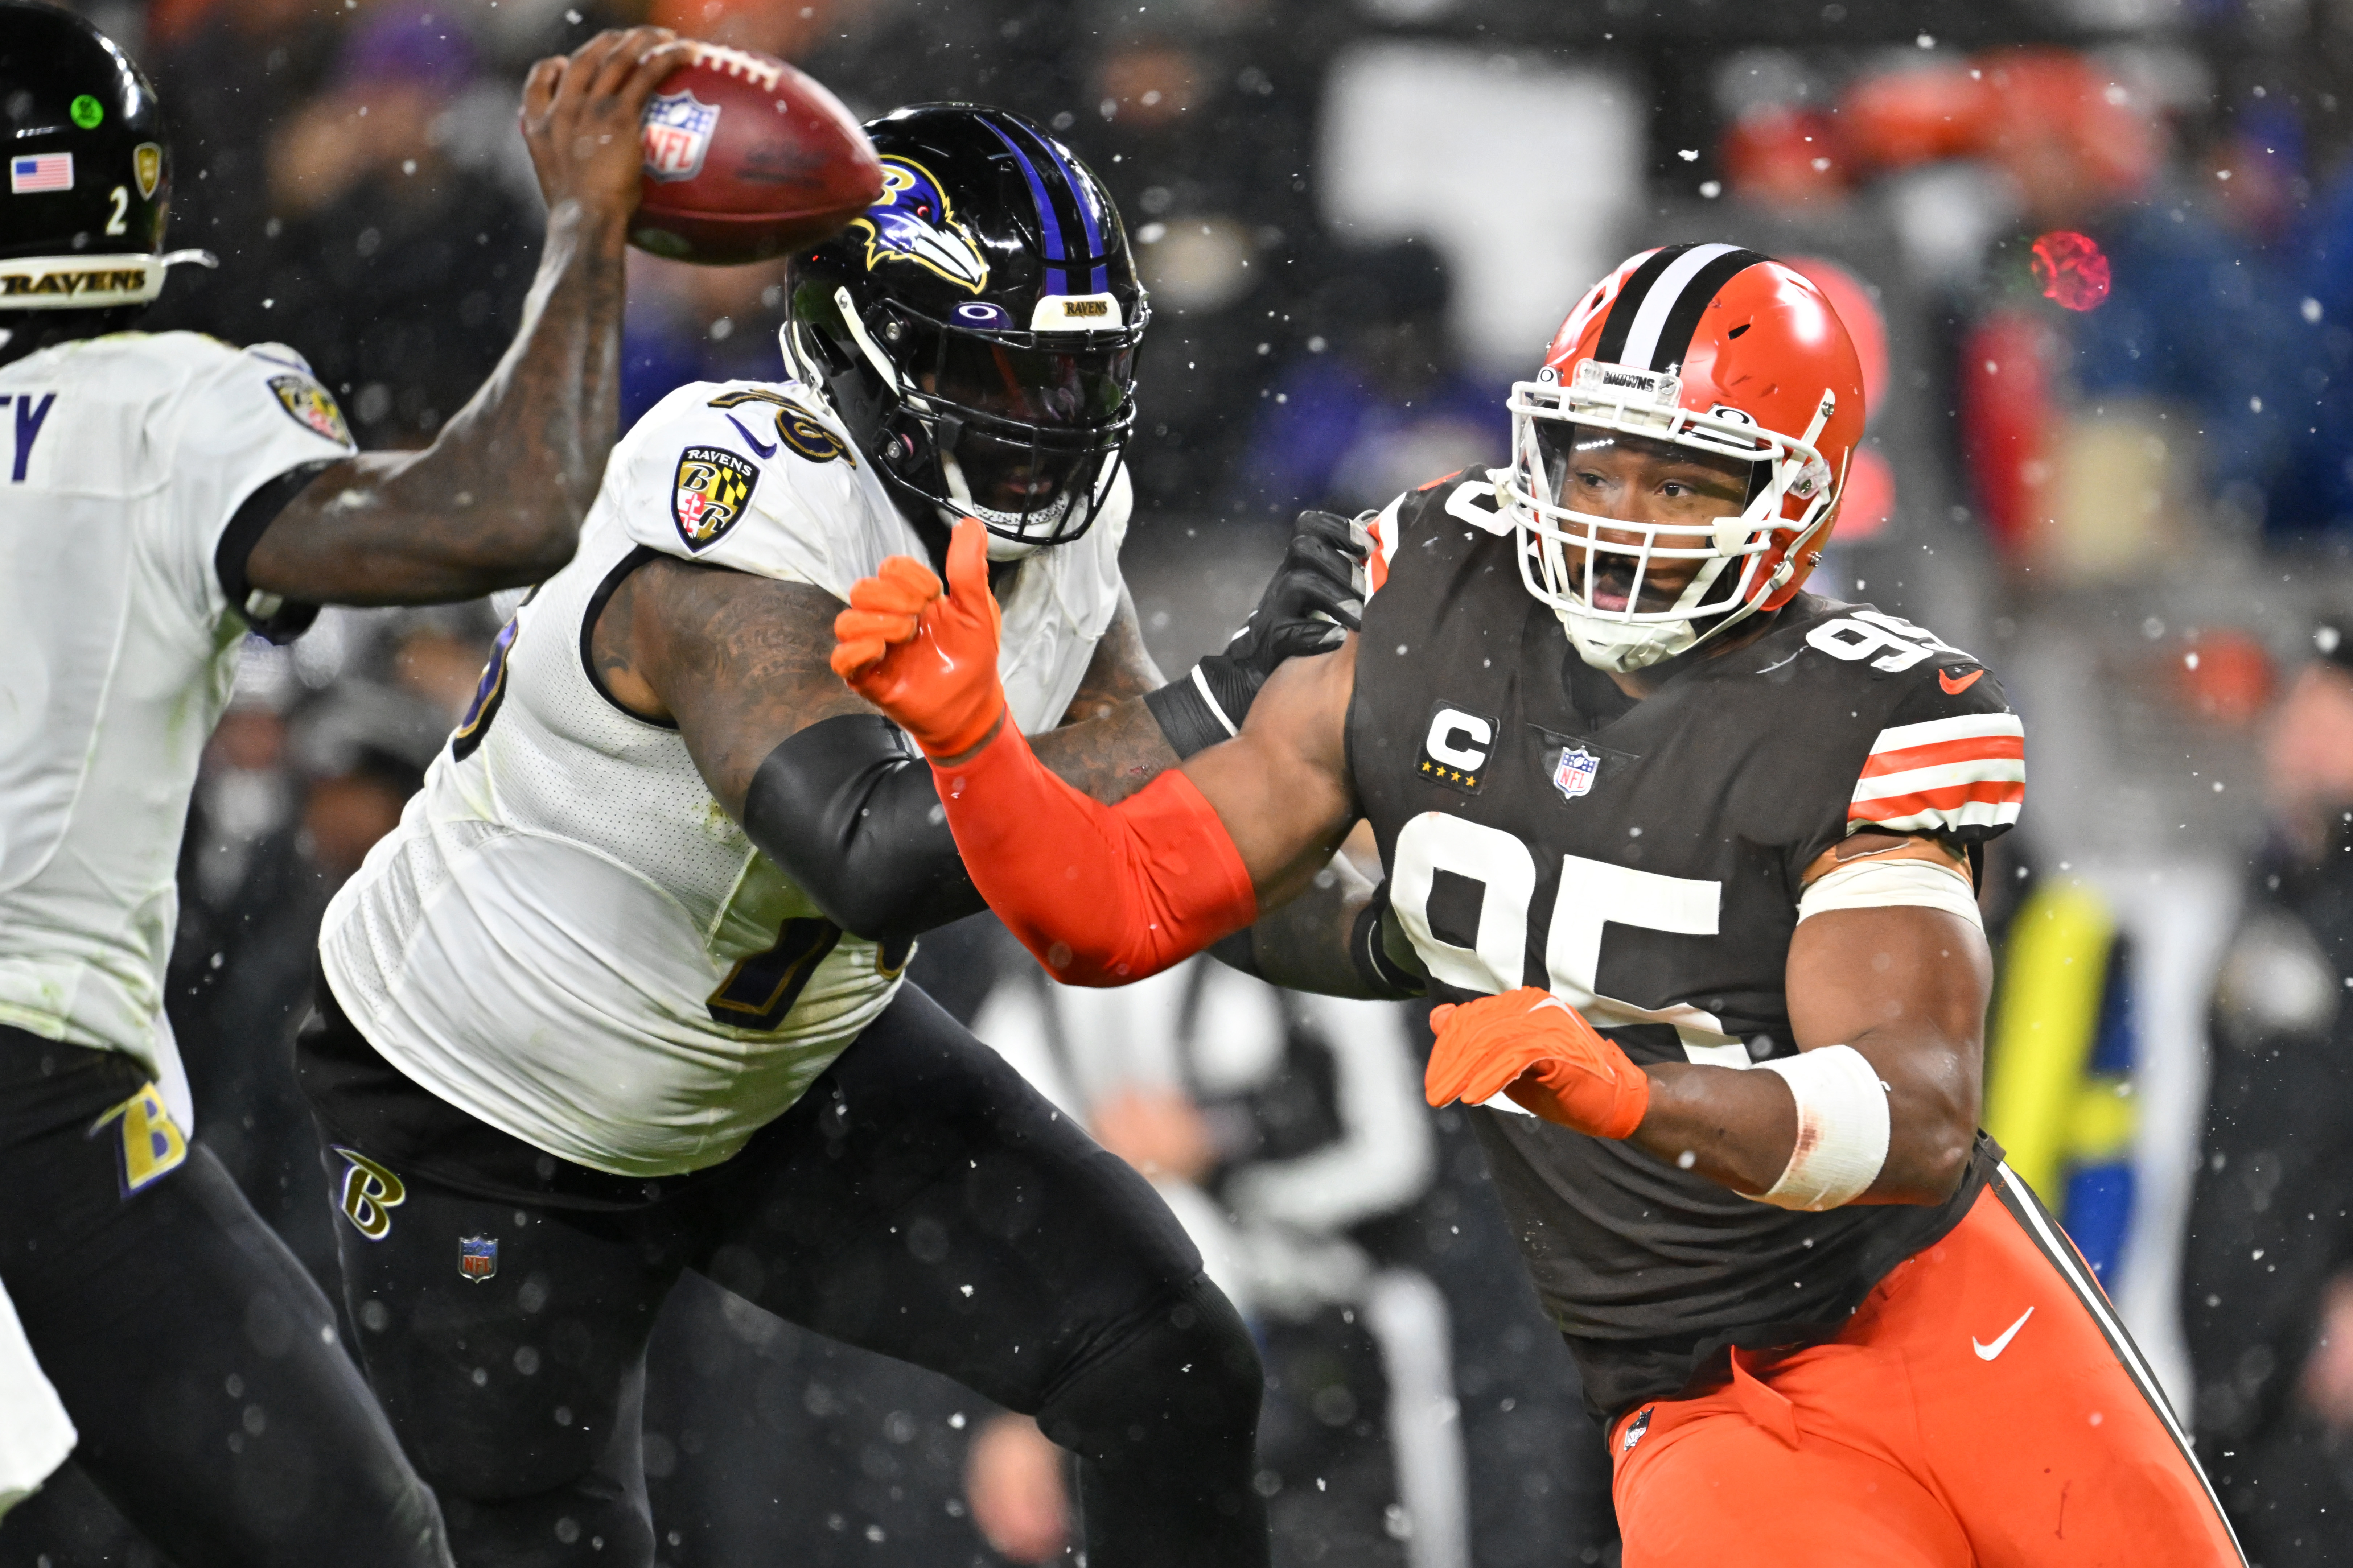 Defensive end Myles Garrett (#95) of the Cleveland Browns competes in the game against the Baltimore Ravens at FirstEnergy Stadium in Cleveland, Ohio, December 17, 2022. /CFP